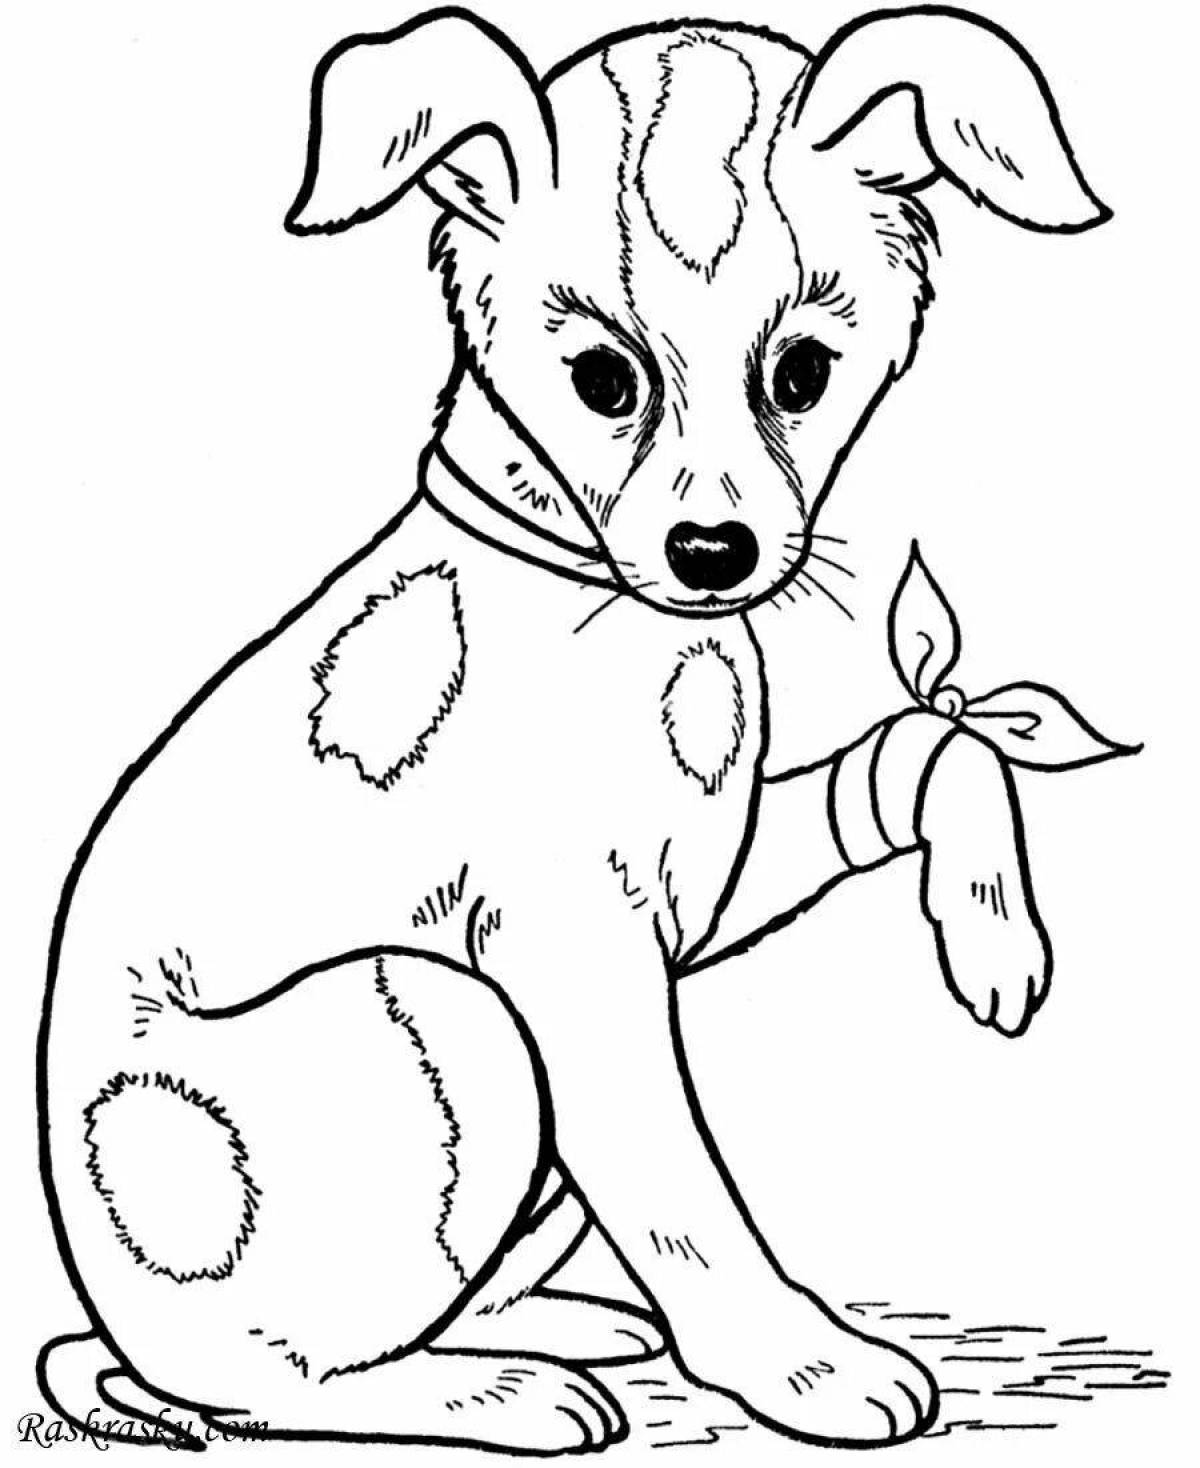 Naughty animal coloring pages